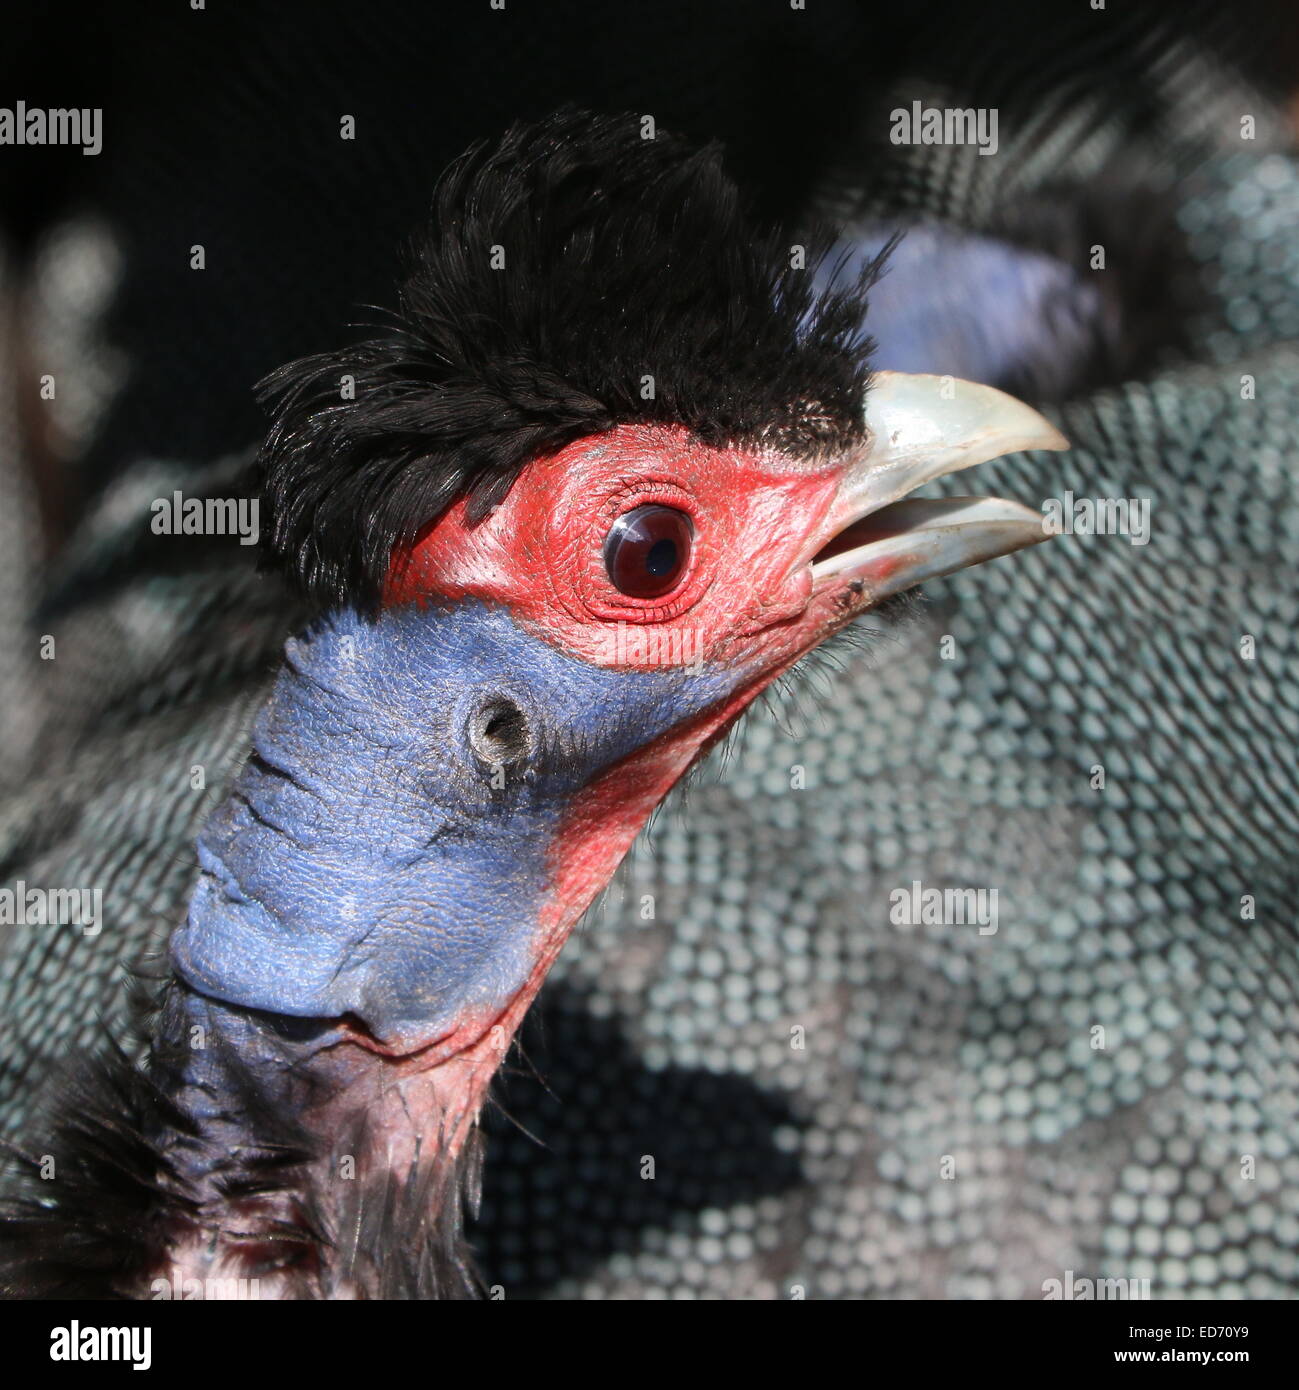 African Crested guineafowl (Guttera pucherani), close-up of the head and funky black  'hairdo' Stock Photo